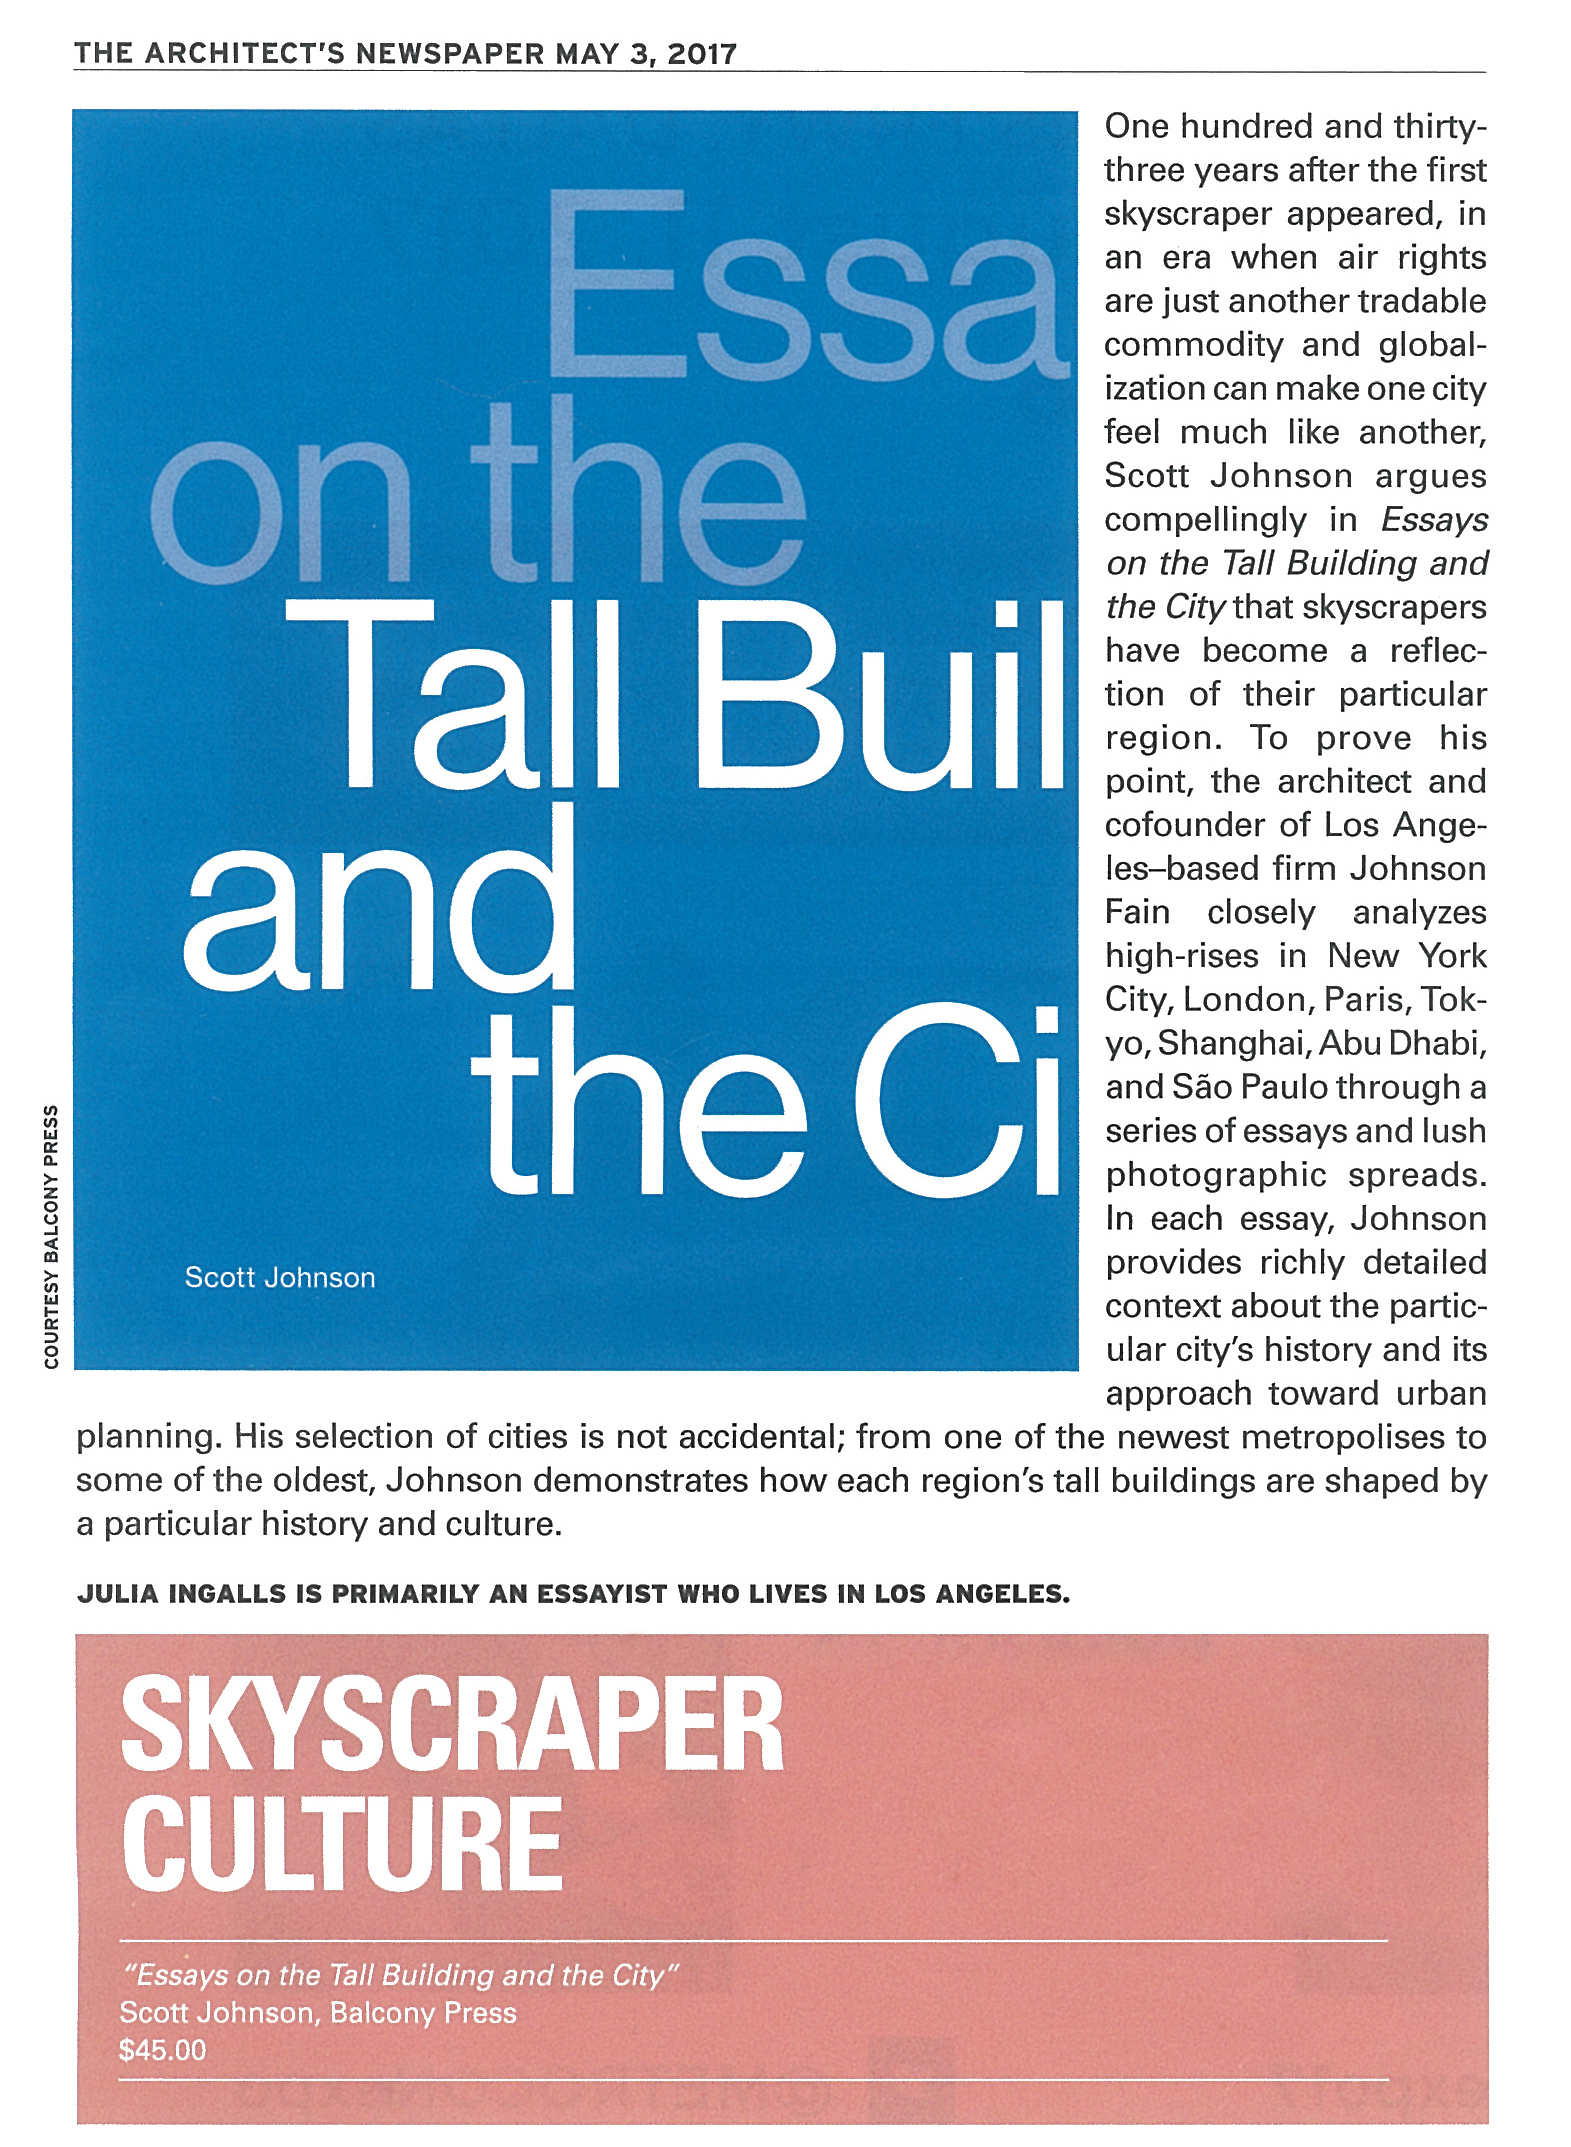 Architect’s Newspaper Review of Essays on the Tall Building and the City